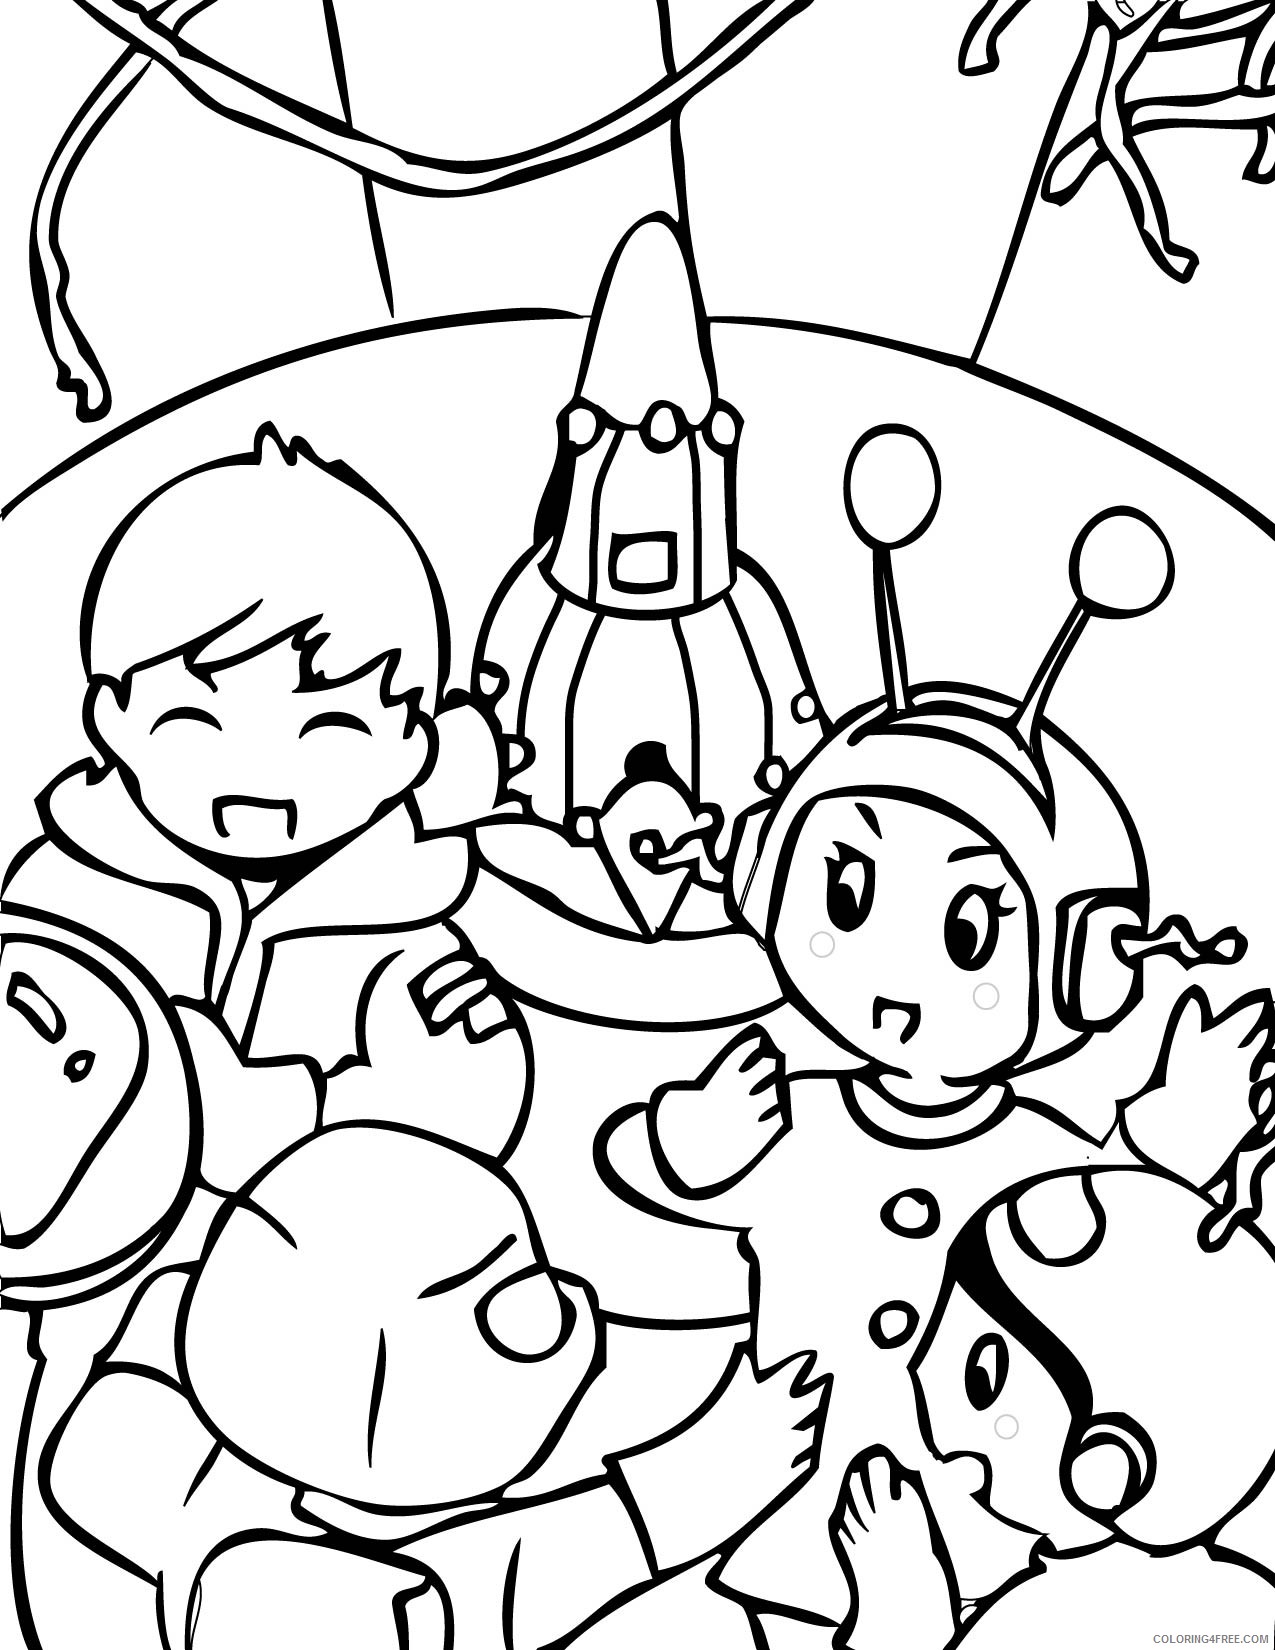 printable space coloring pages for kids Coloring4free